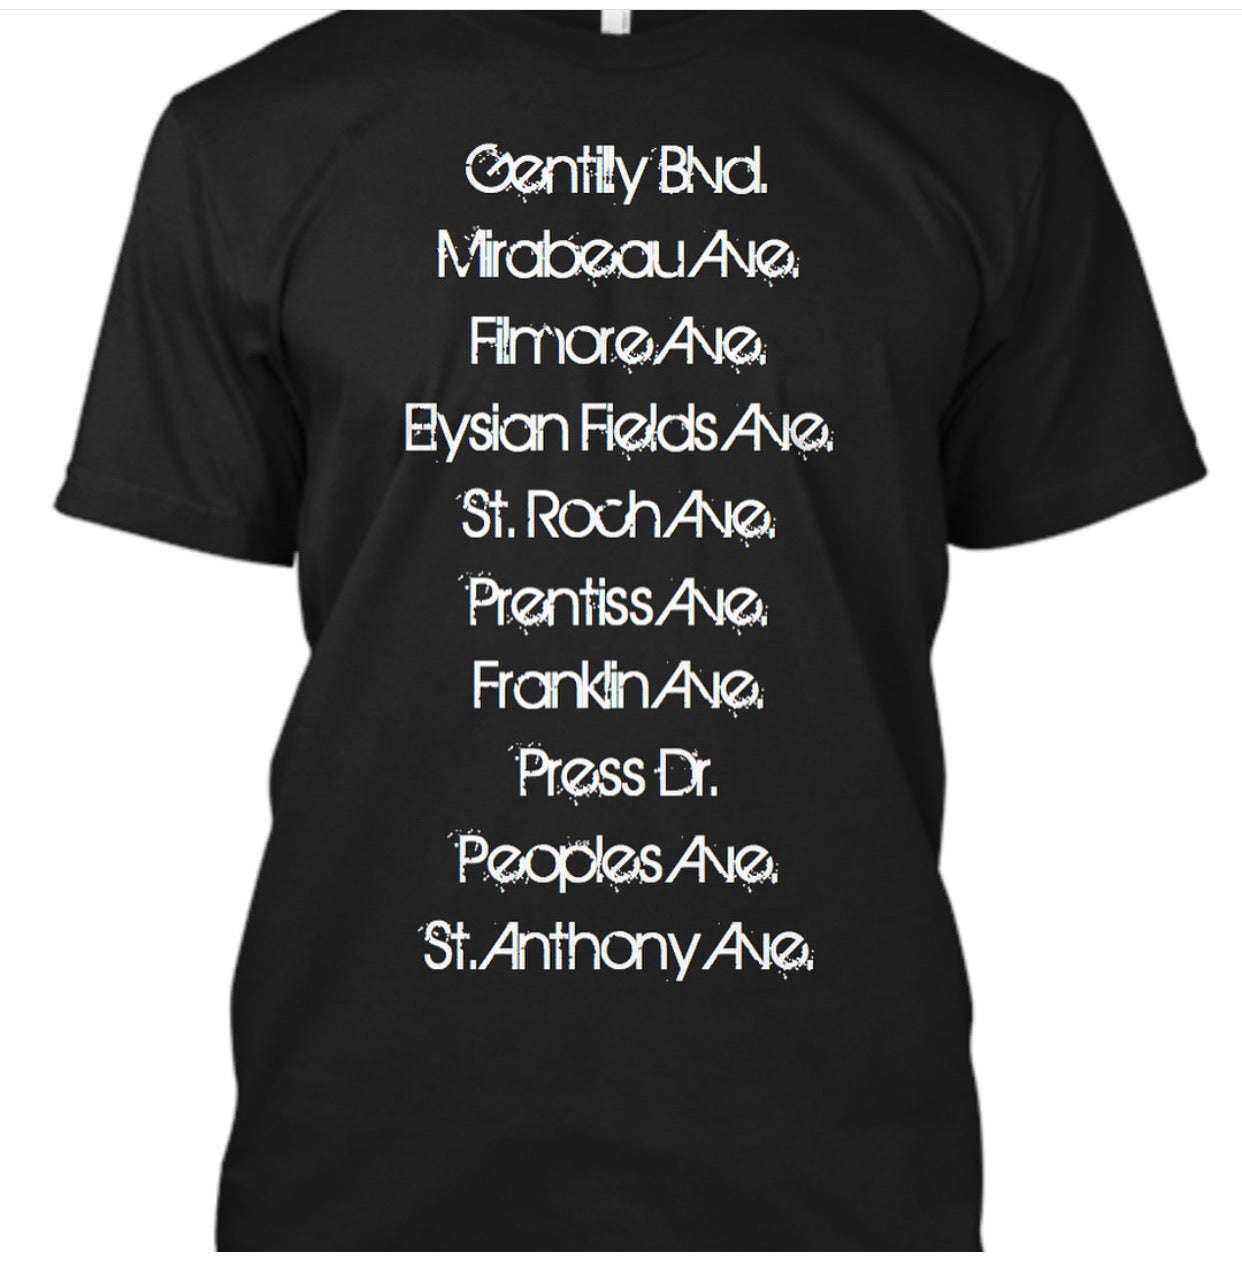 GENTILLY (1st Edition Men's T-shirt)